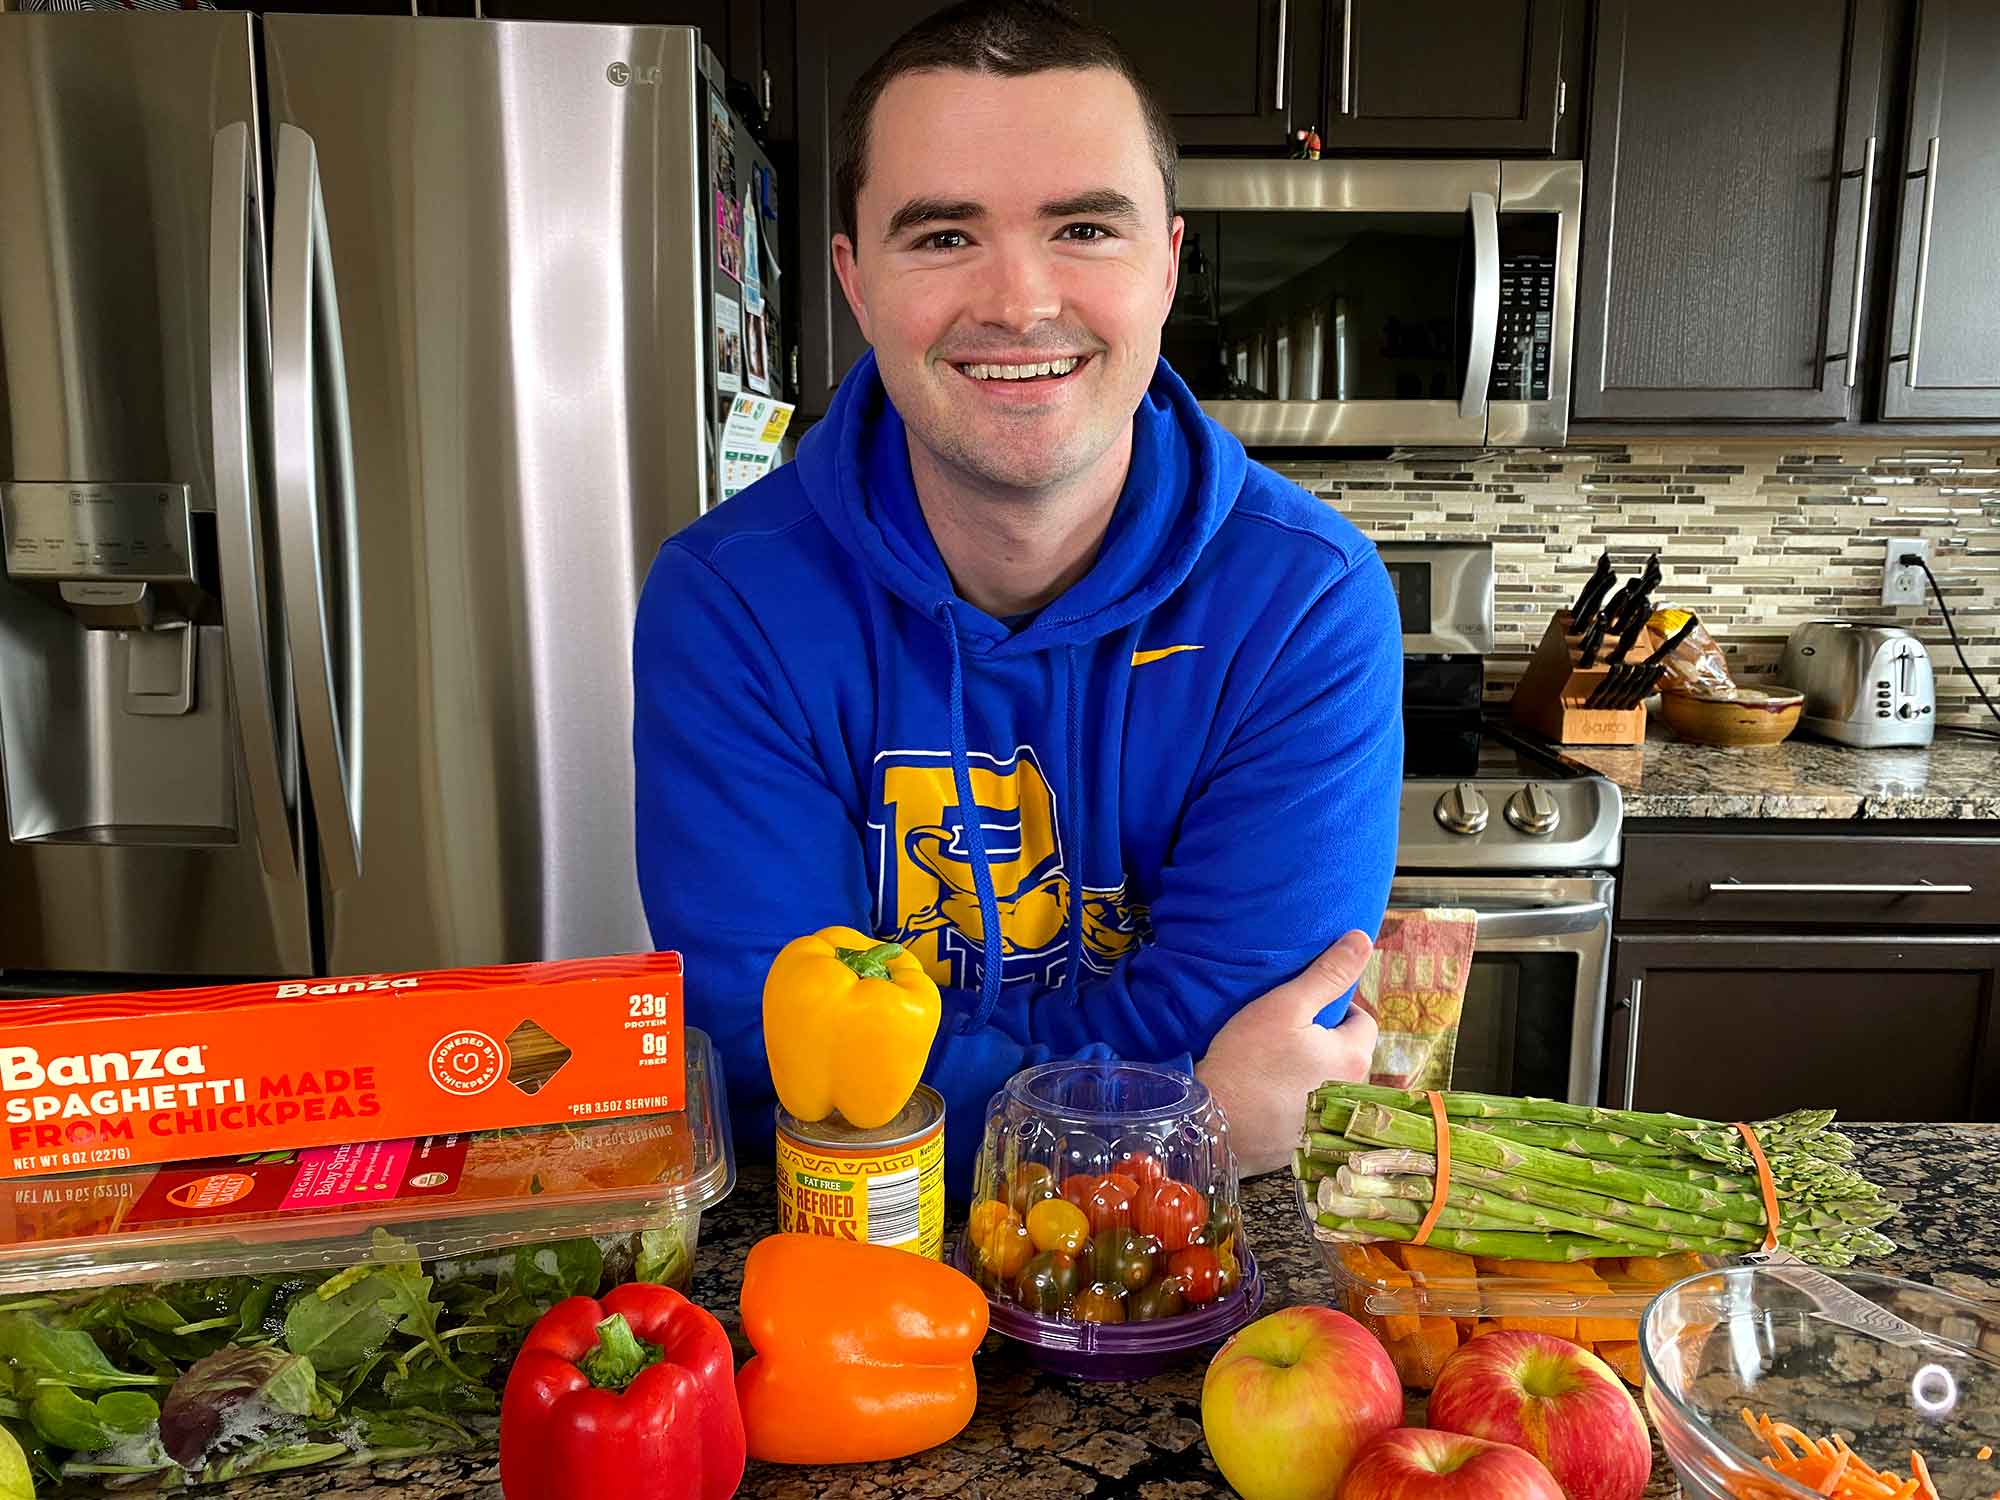 Chris Gates posing with an assortment of plant-based foods